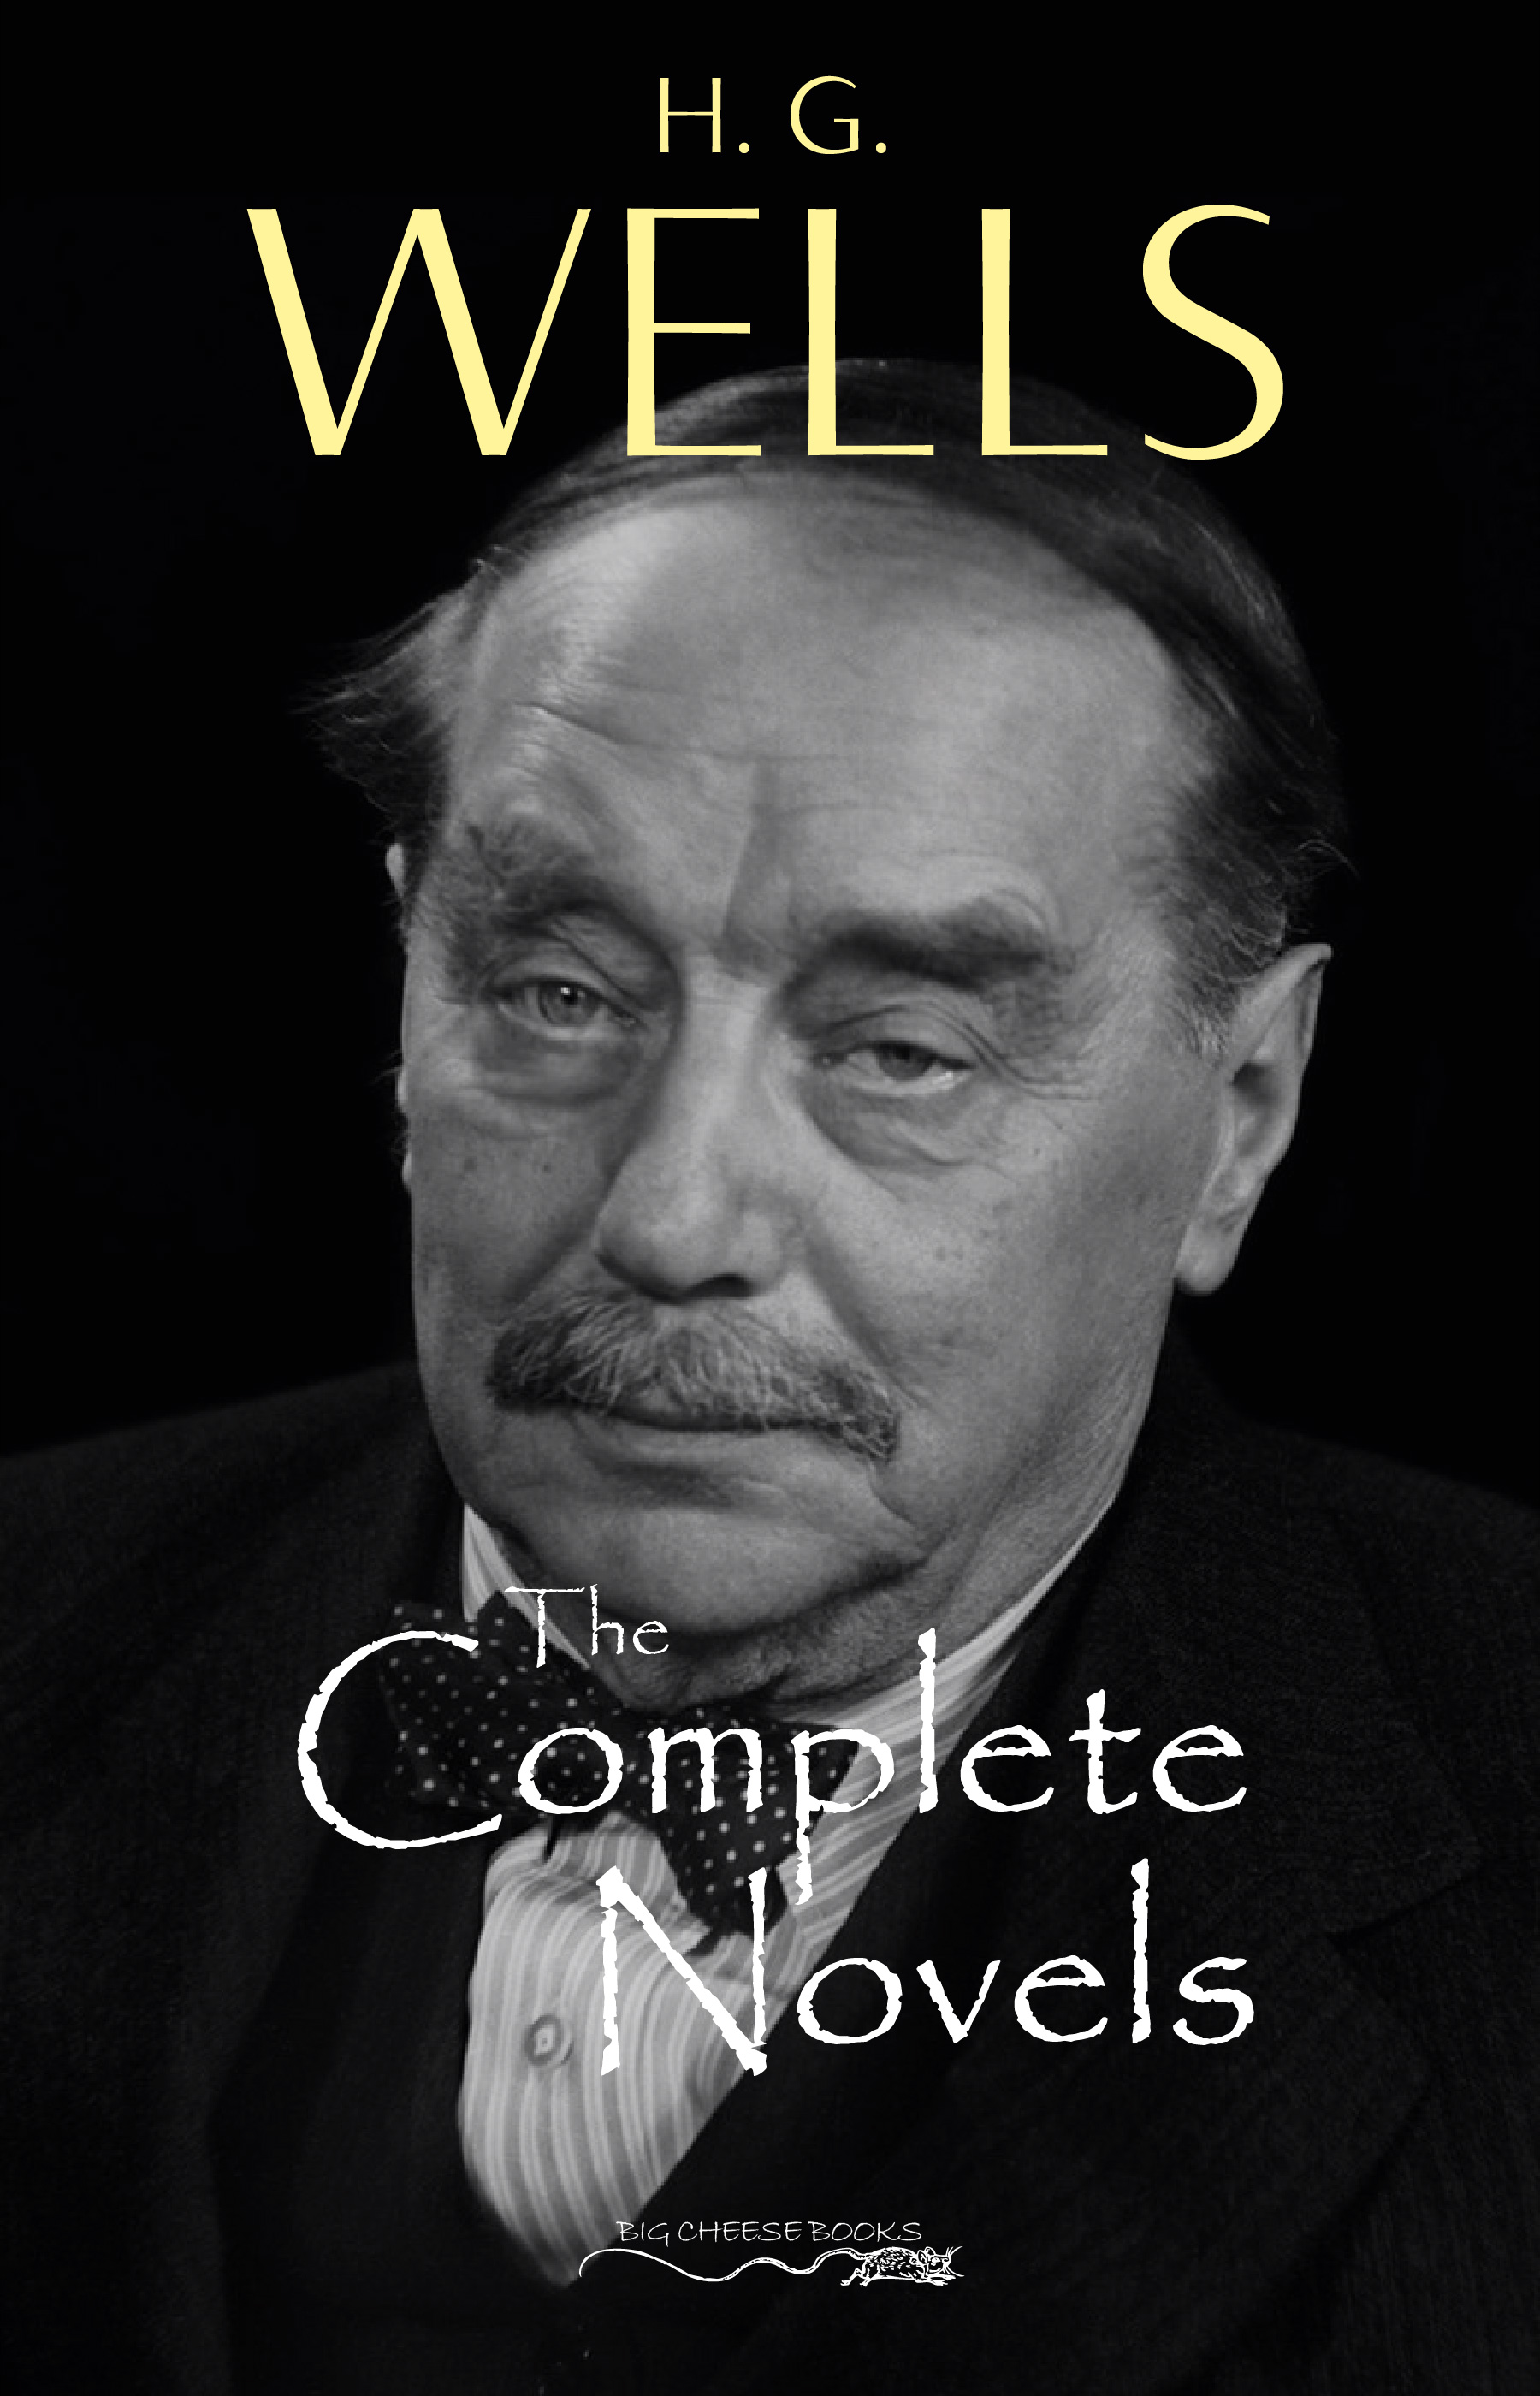 H. G. Wells: The Complete Novels - The Time Machine, The War of the Worlds, The Invisible Man, The Island of Doctor Moreau, When The Sleeper Wakes, A Modern Utopia and much more…